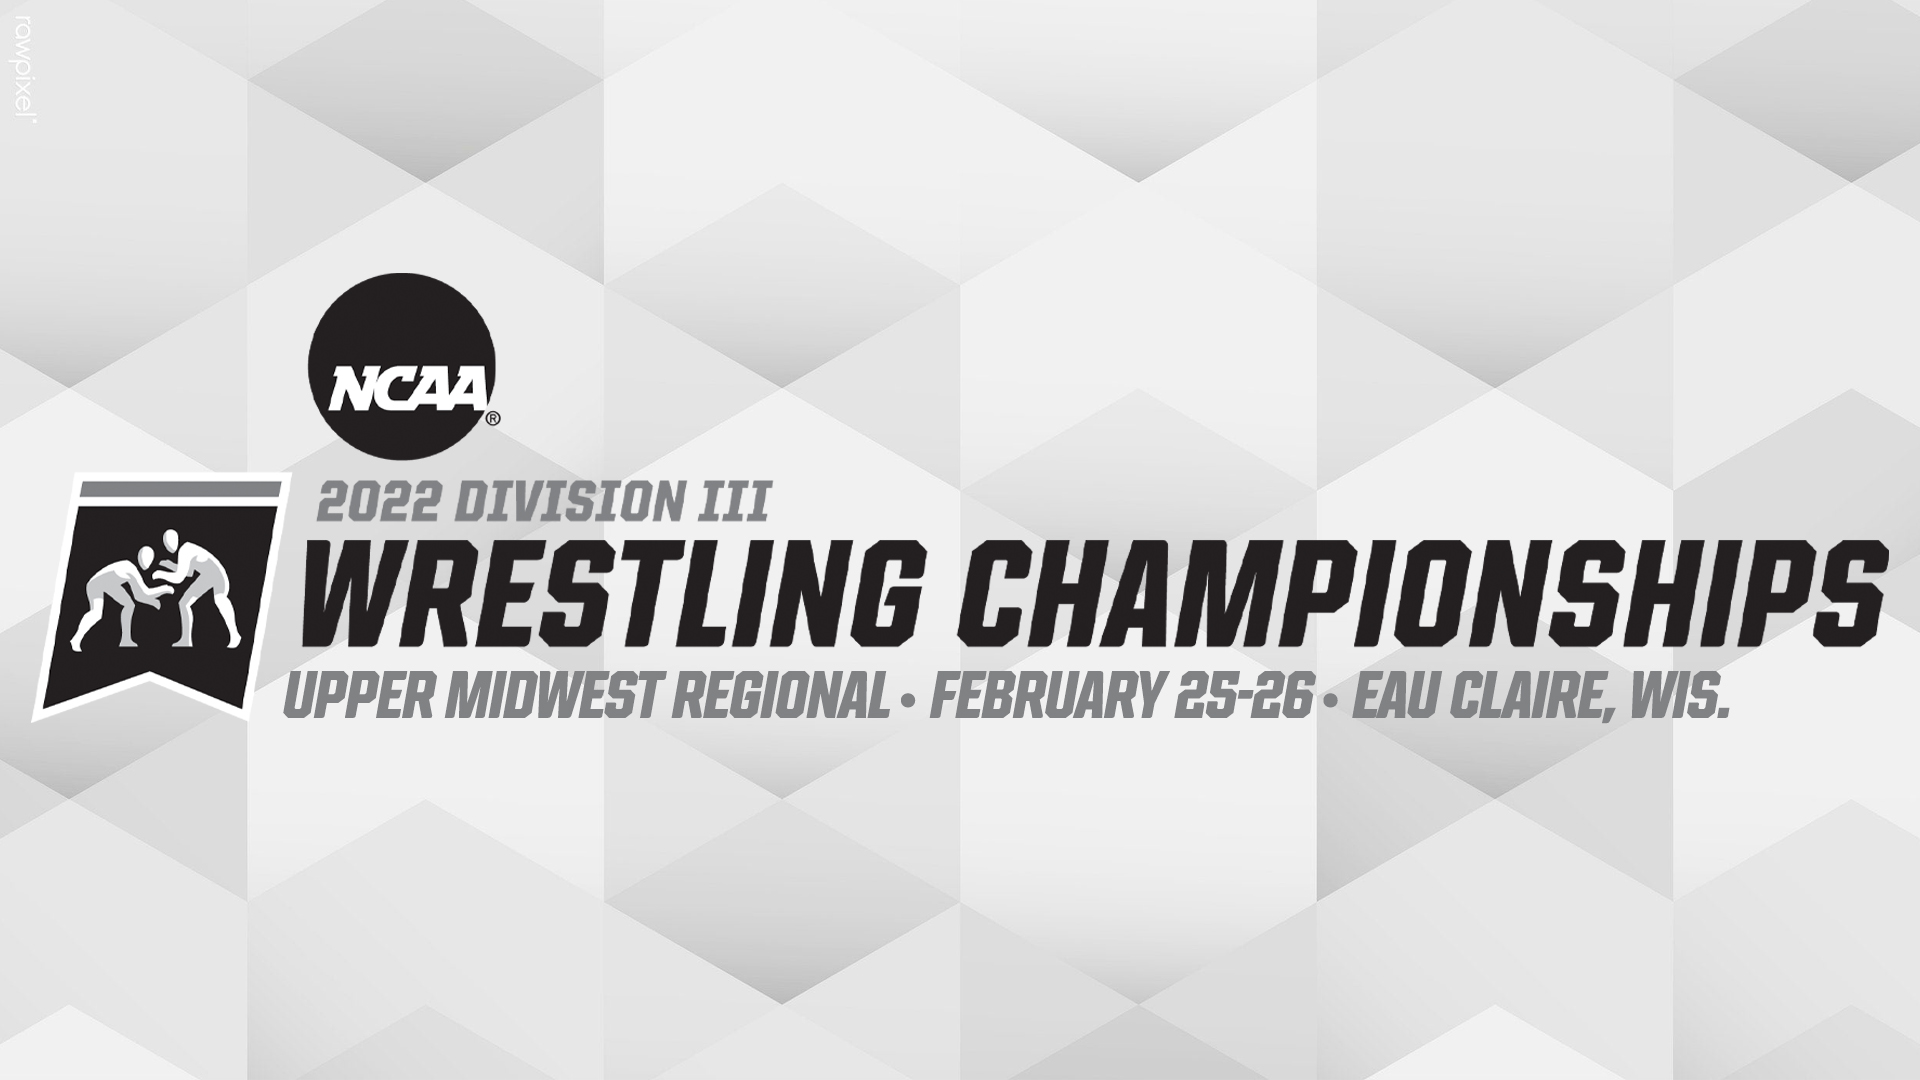 Titans To Wrestle At NCAA Upper Midwest Regional